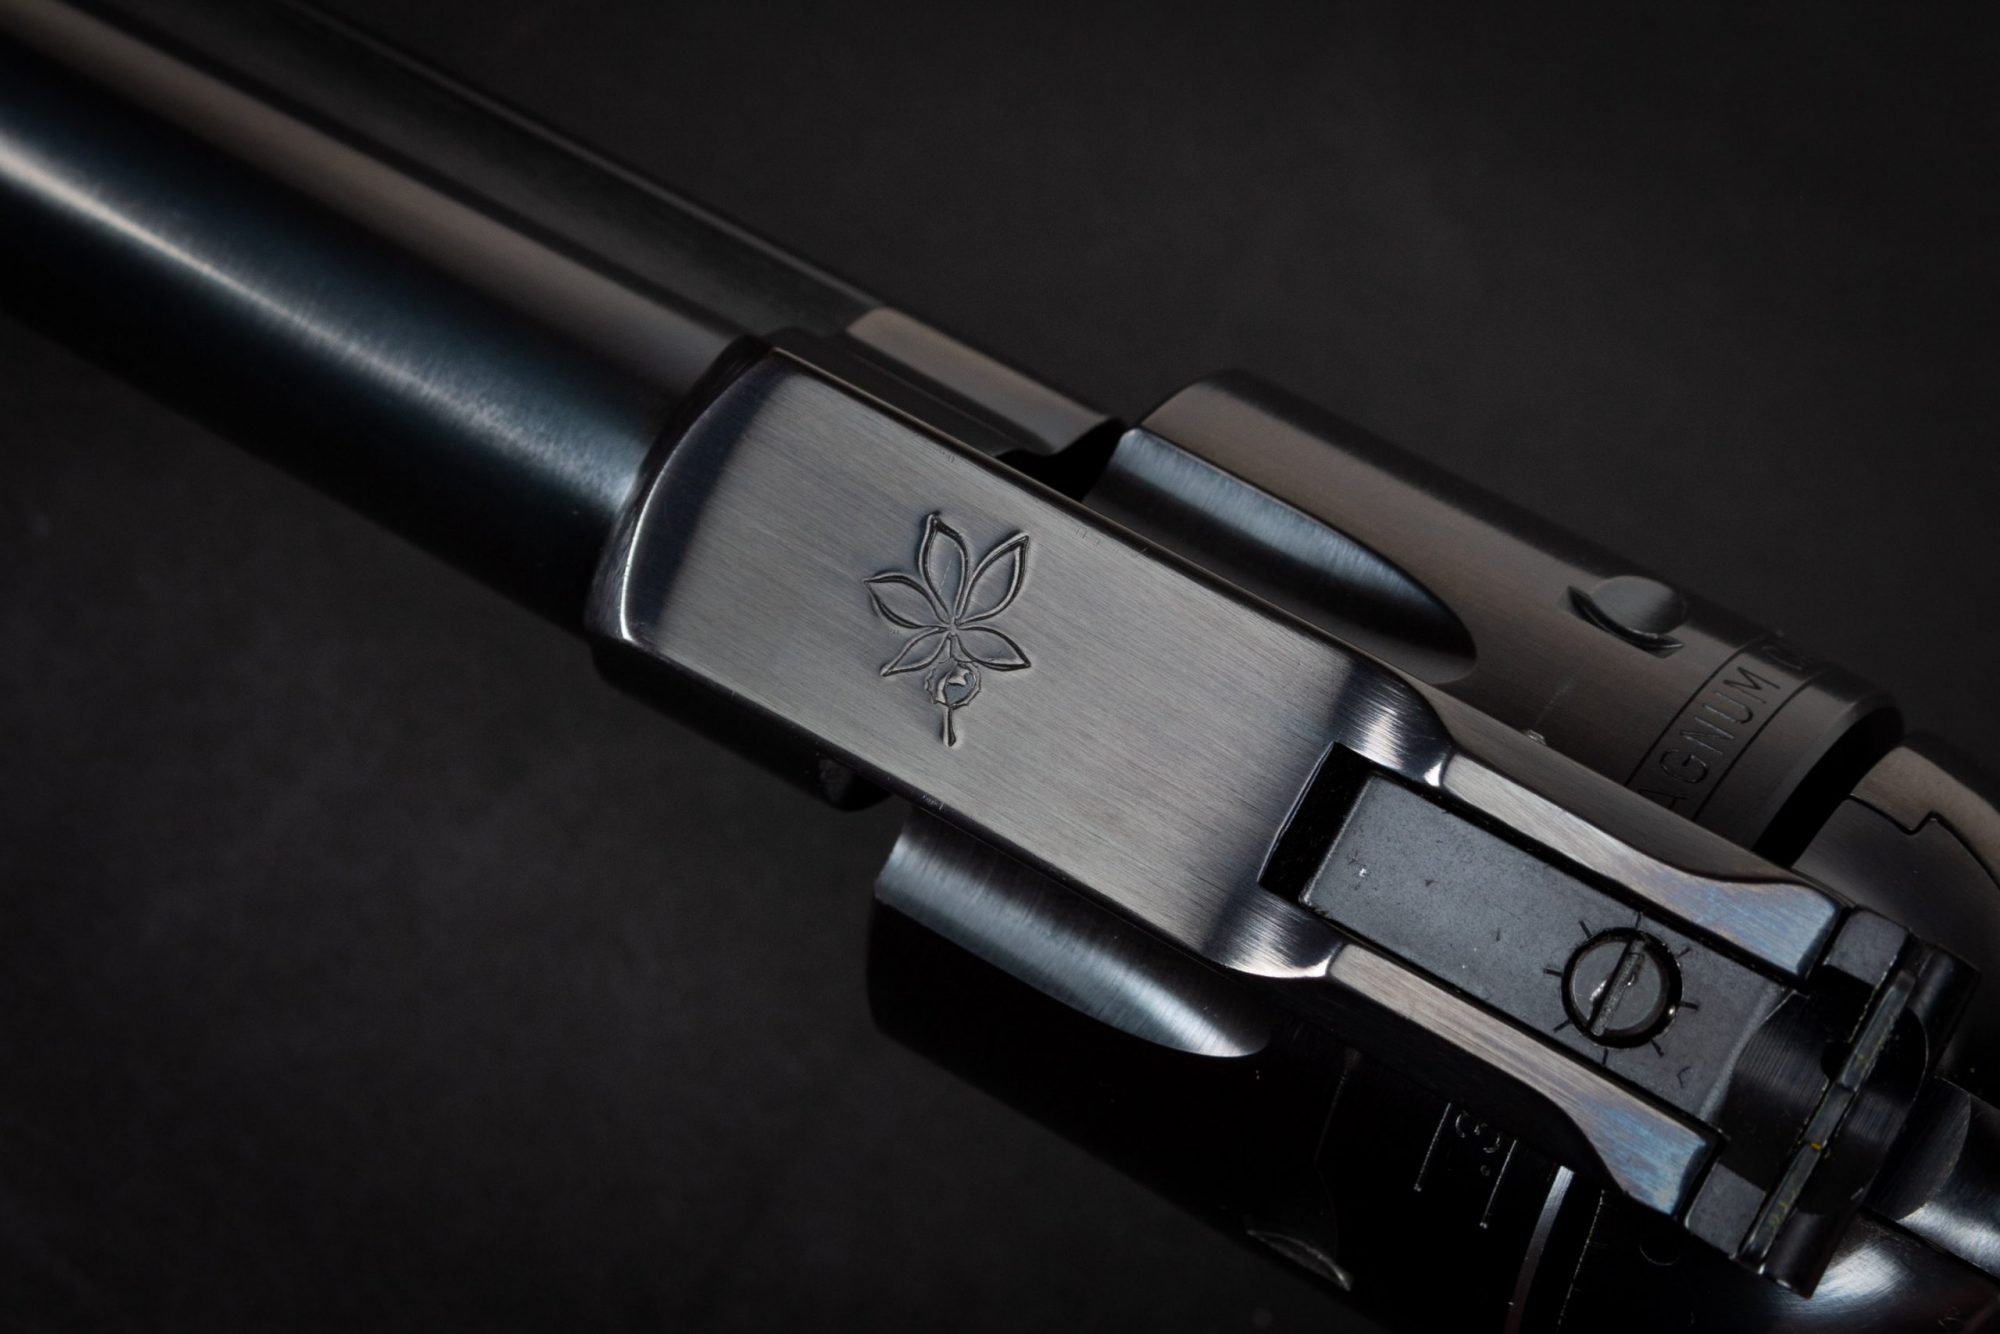 Phot of a Ruger New Model Blackhawk "Buckeye Special", sold as-is by Turnbull Restoration in Blomfield, NY